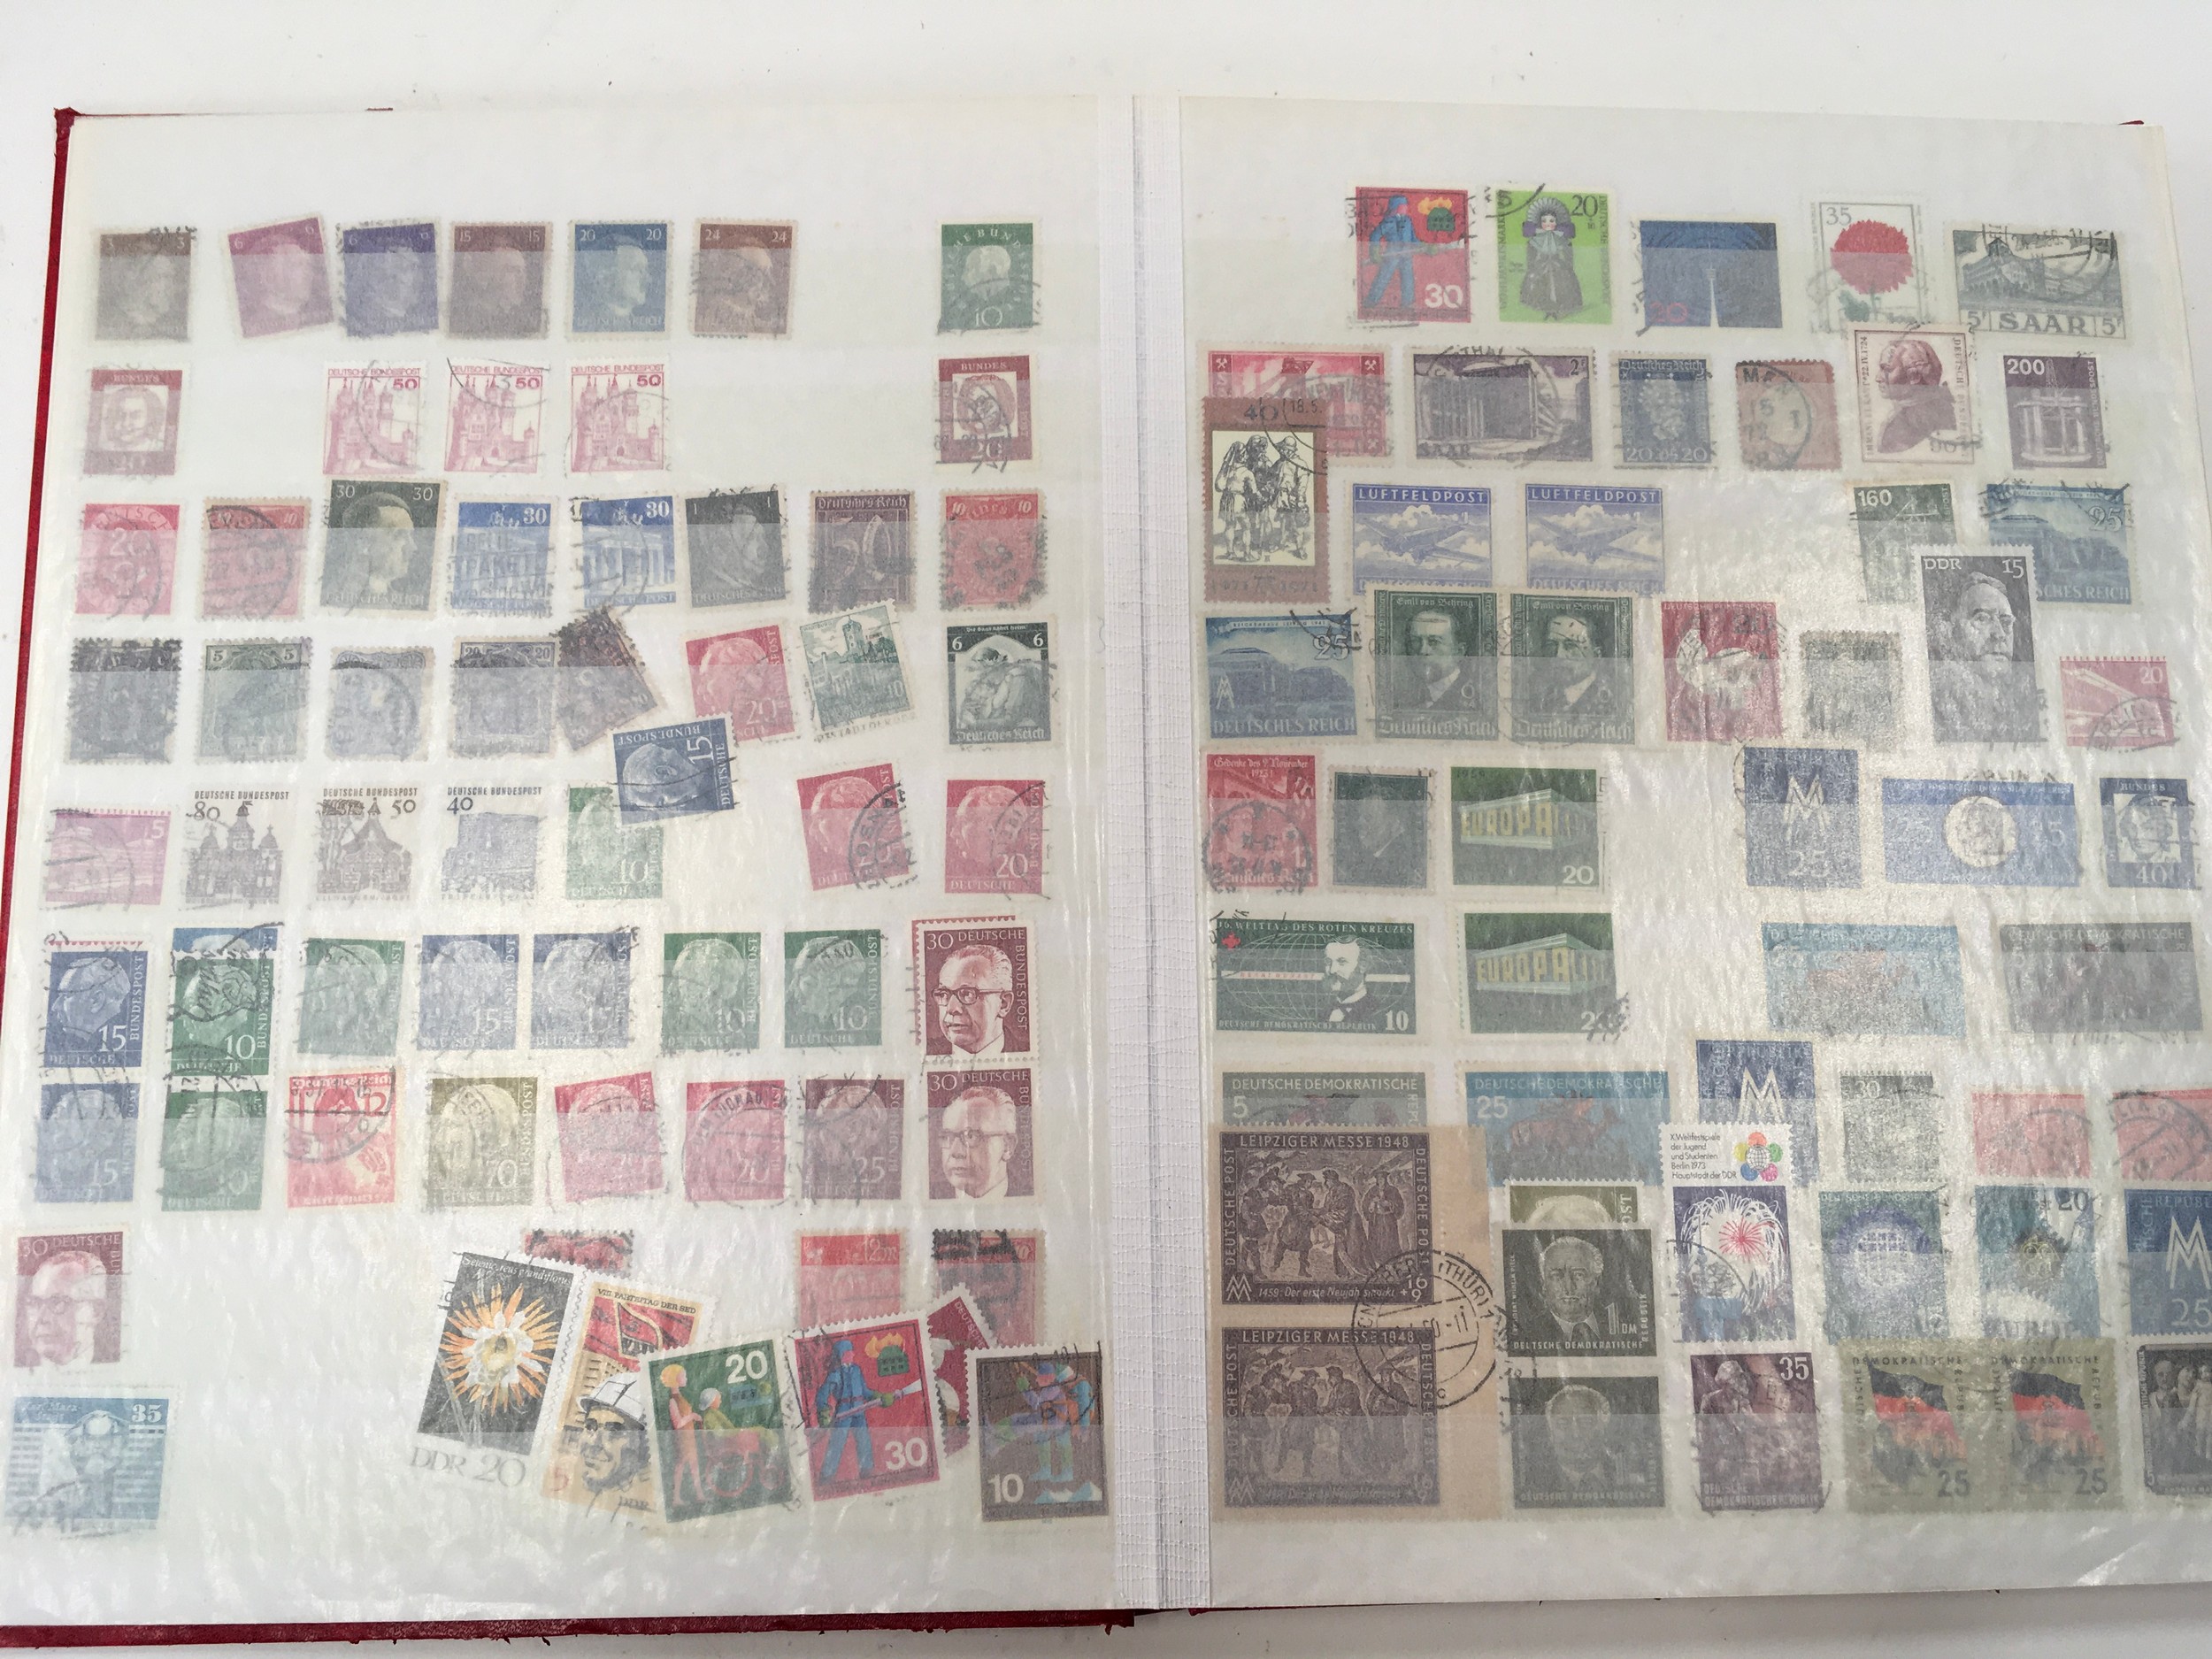 Red album containing German stamps. - Image 2 of 9